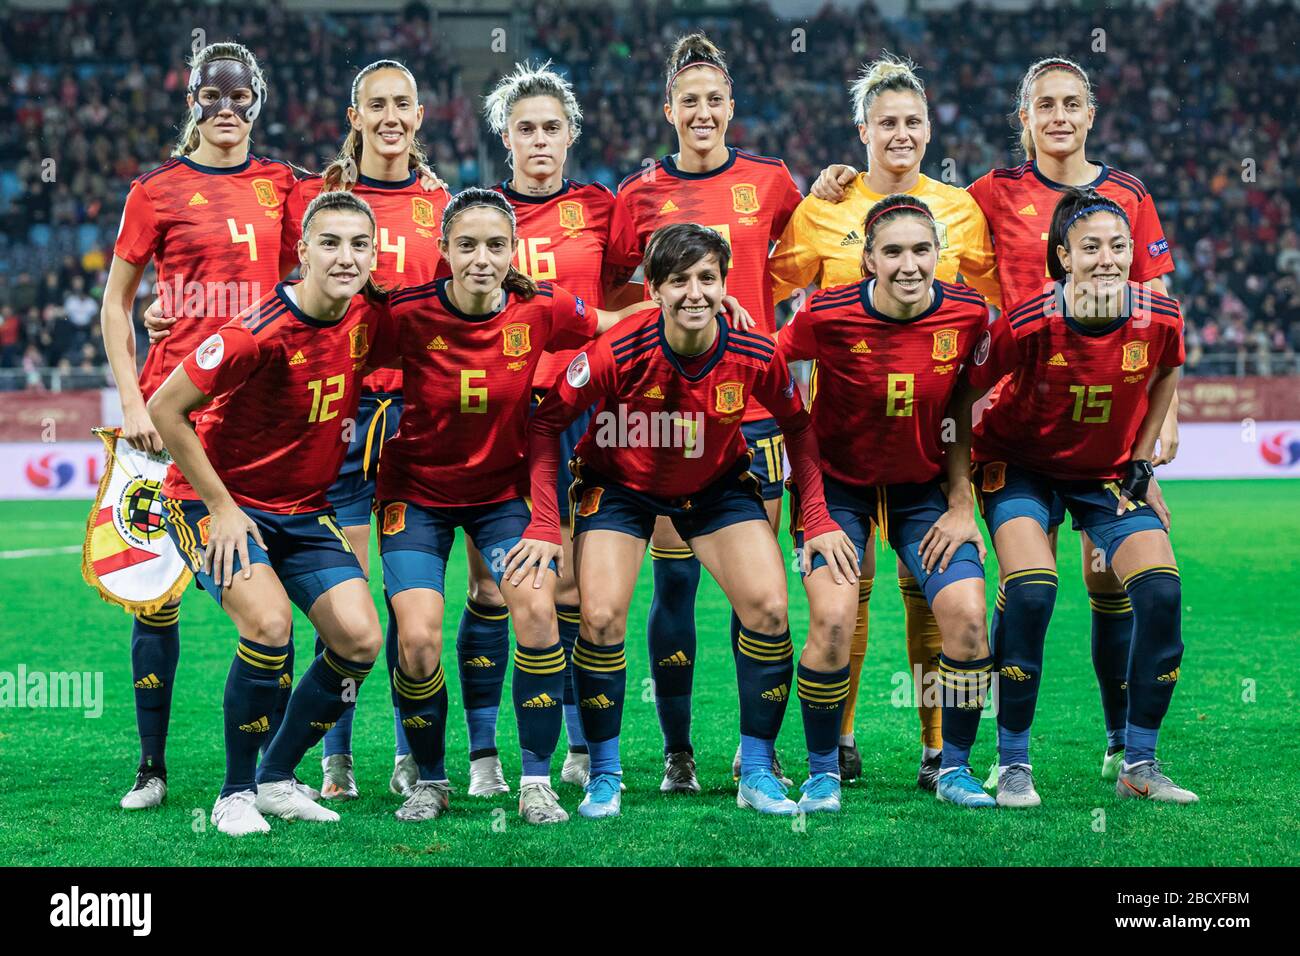 November 12, 2019, Lublin, Poland: Spain women's national football team pose for a photo before the UEFA Women's EURO 2021 qualifying match between Poland and Spain at Arena Lublin. (Credit Image: © Mikolaj Barbanell/SOPA Images via ZUMA Wire) Stock Photo